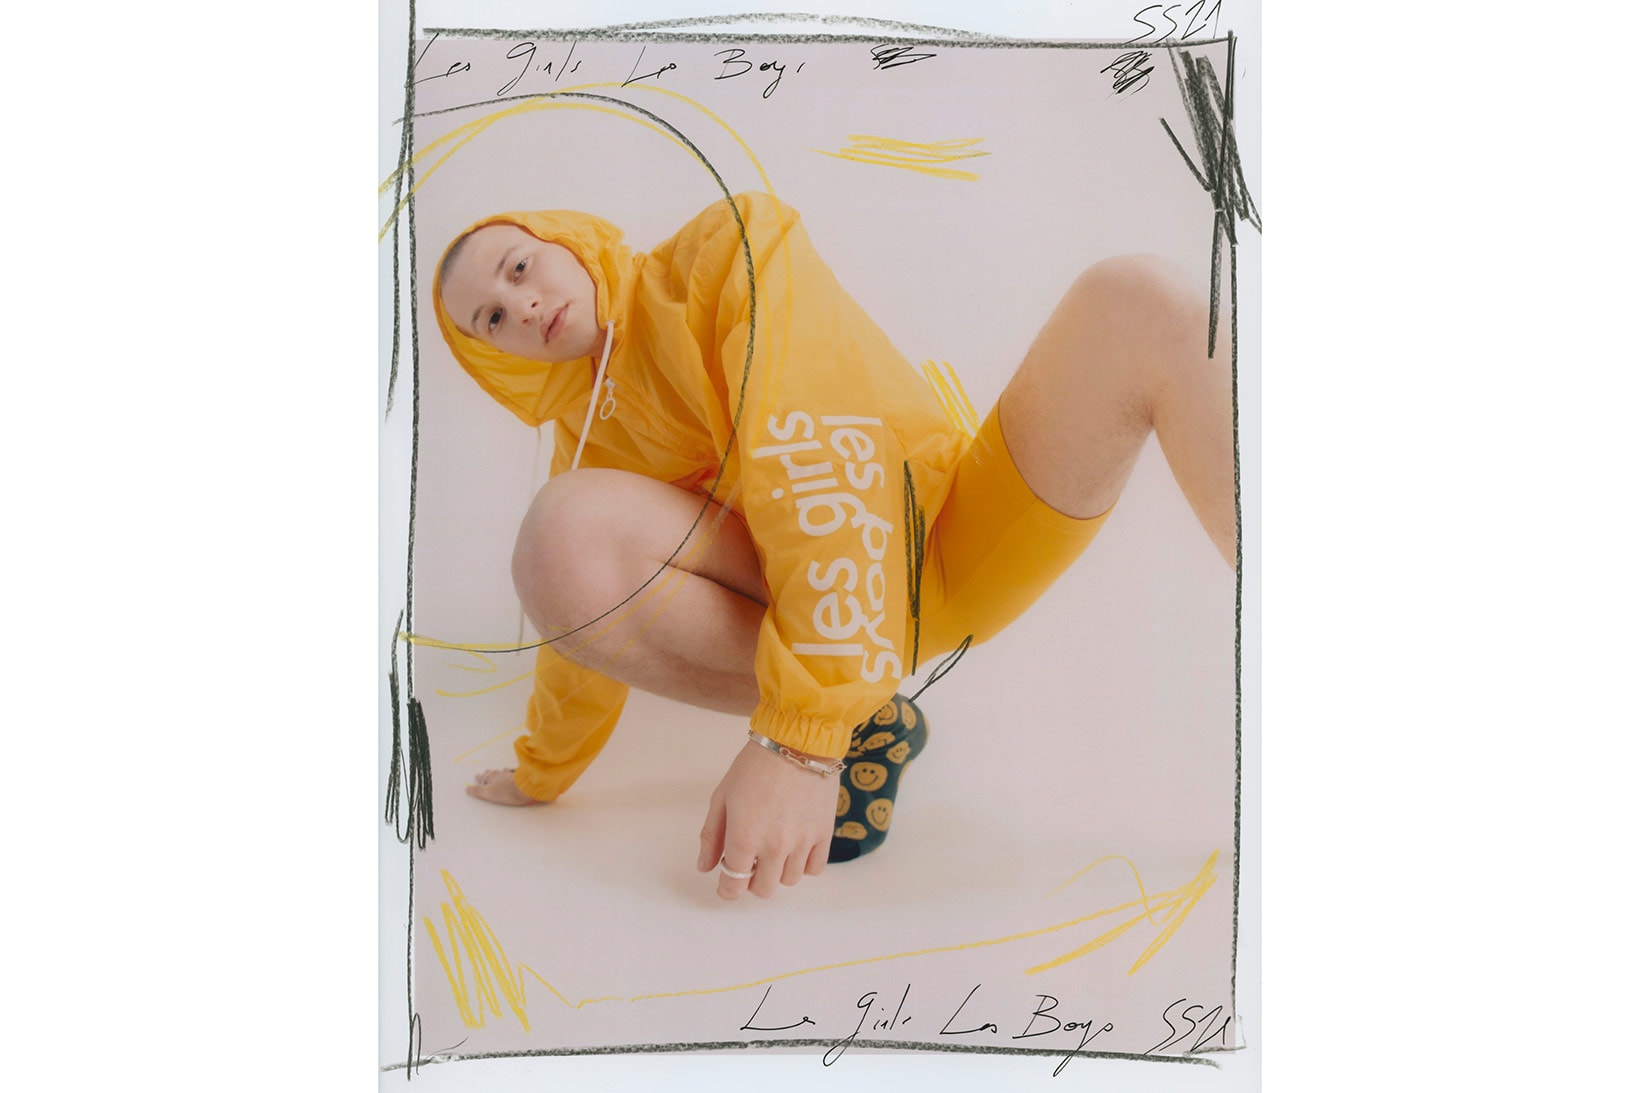 les girls les boys spring summer collection campaign hoodie socks